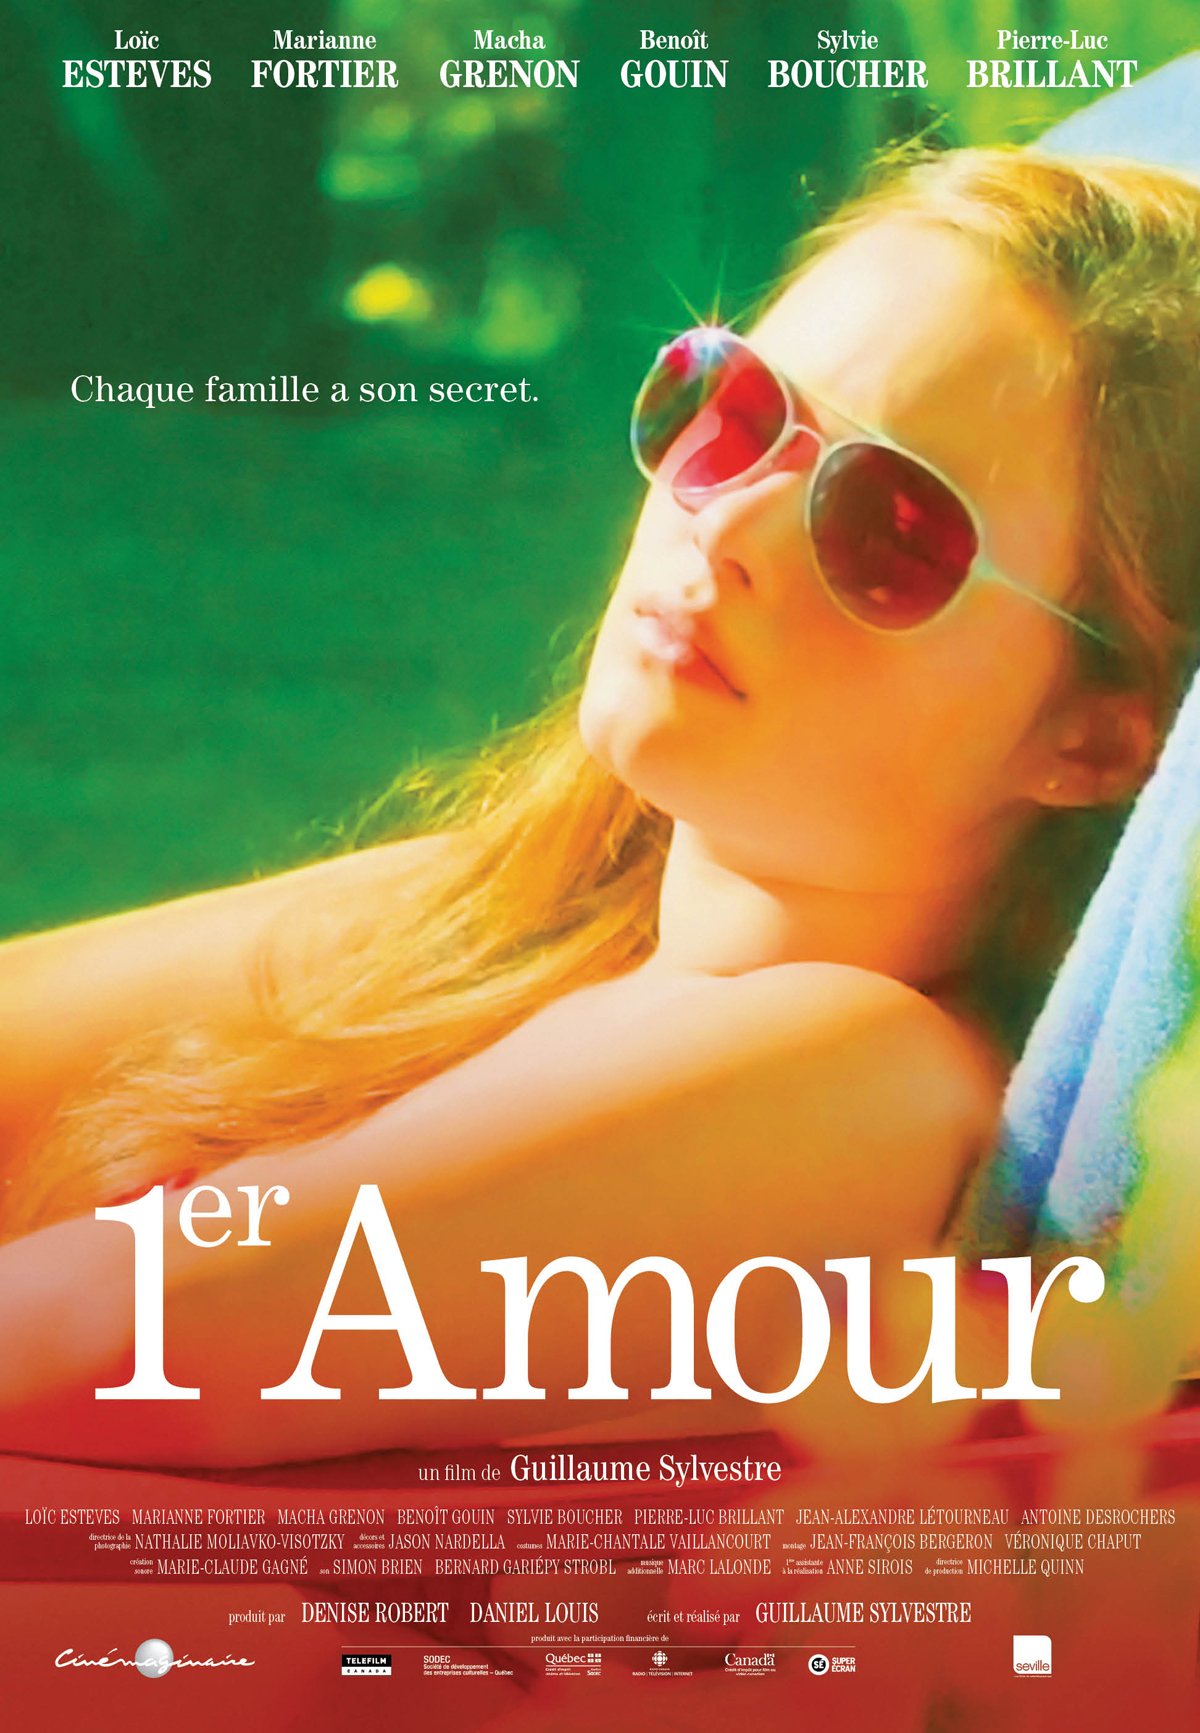 Poster of the movie 1er amour